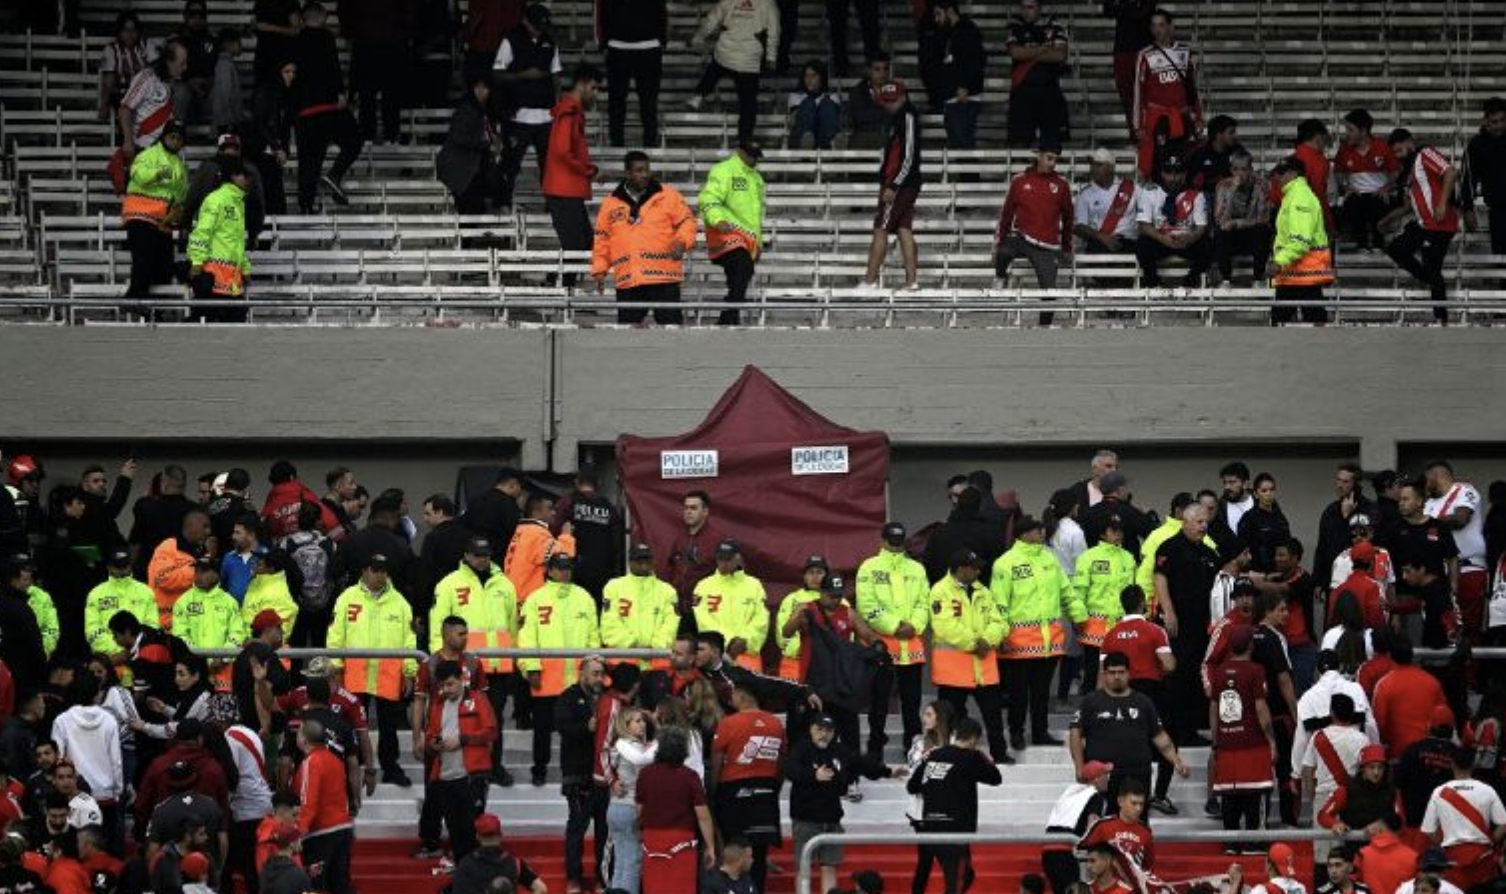 Fan dies after falling from stand during River Plate vs Defensa y Justicia game